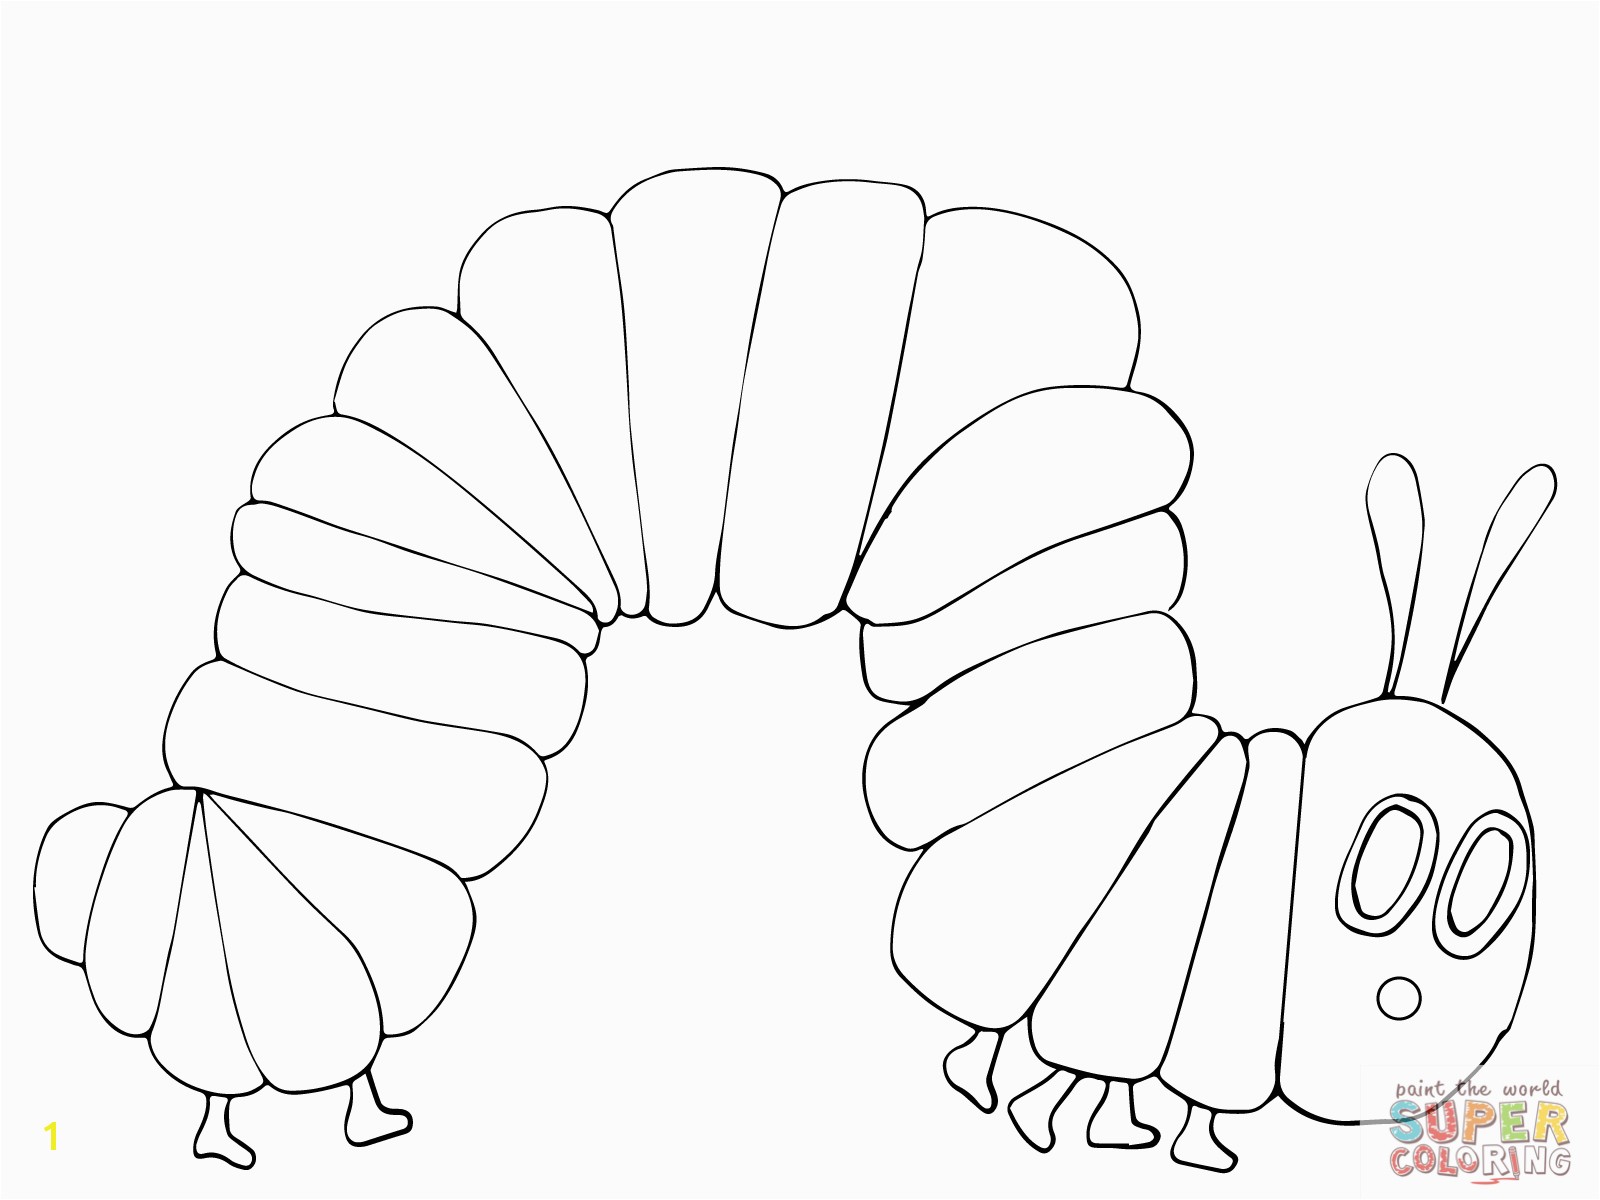 Very Hungry Caterpillar Coloring Pages To Download And Print For